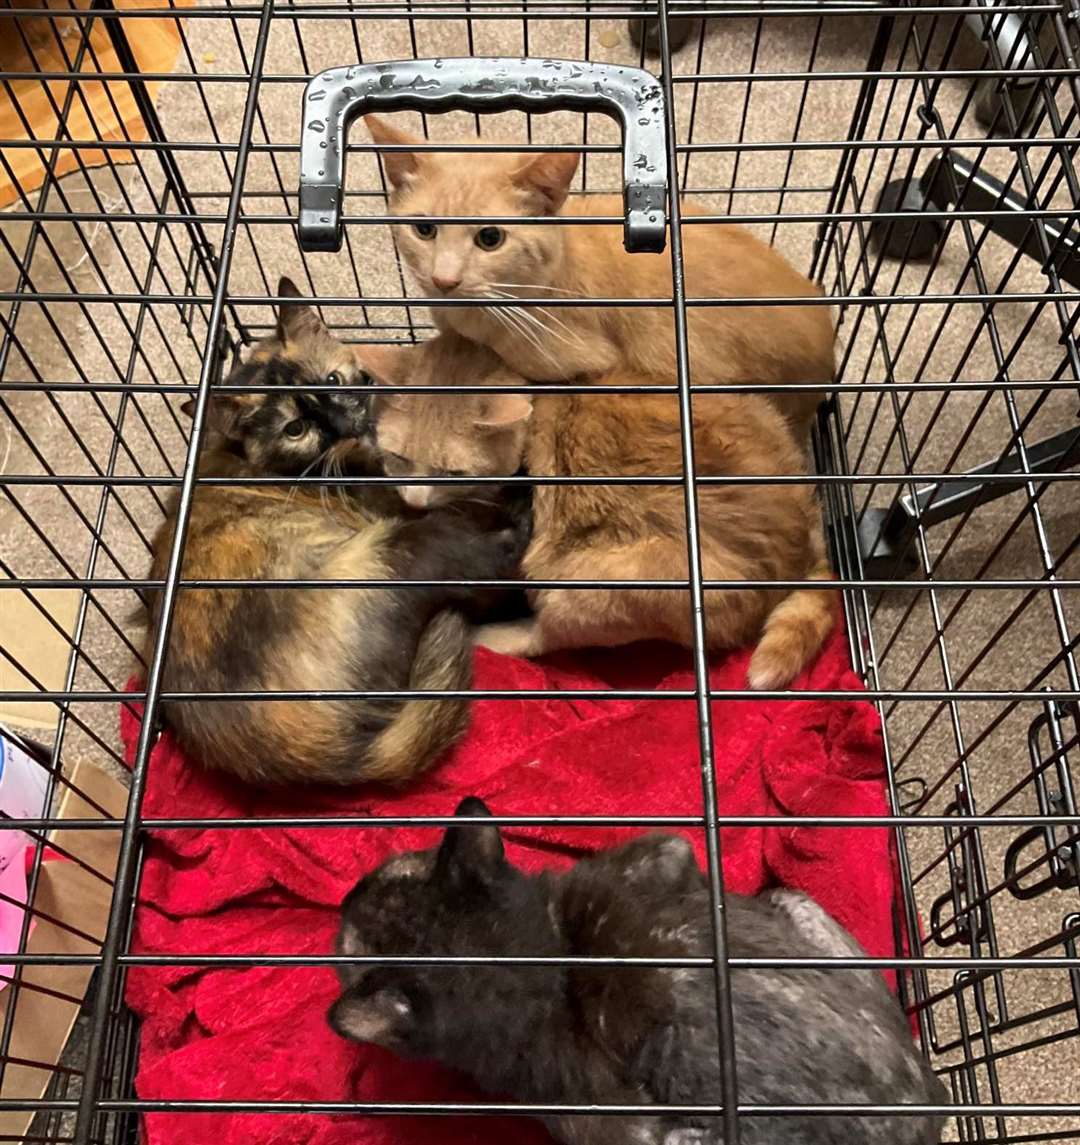 Four of the six cats that were found crammed into this crate and abandoned